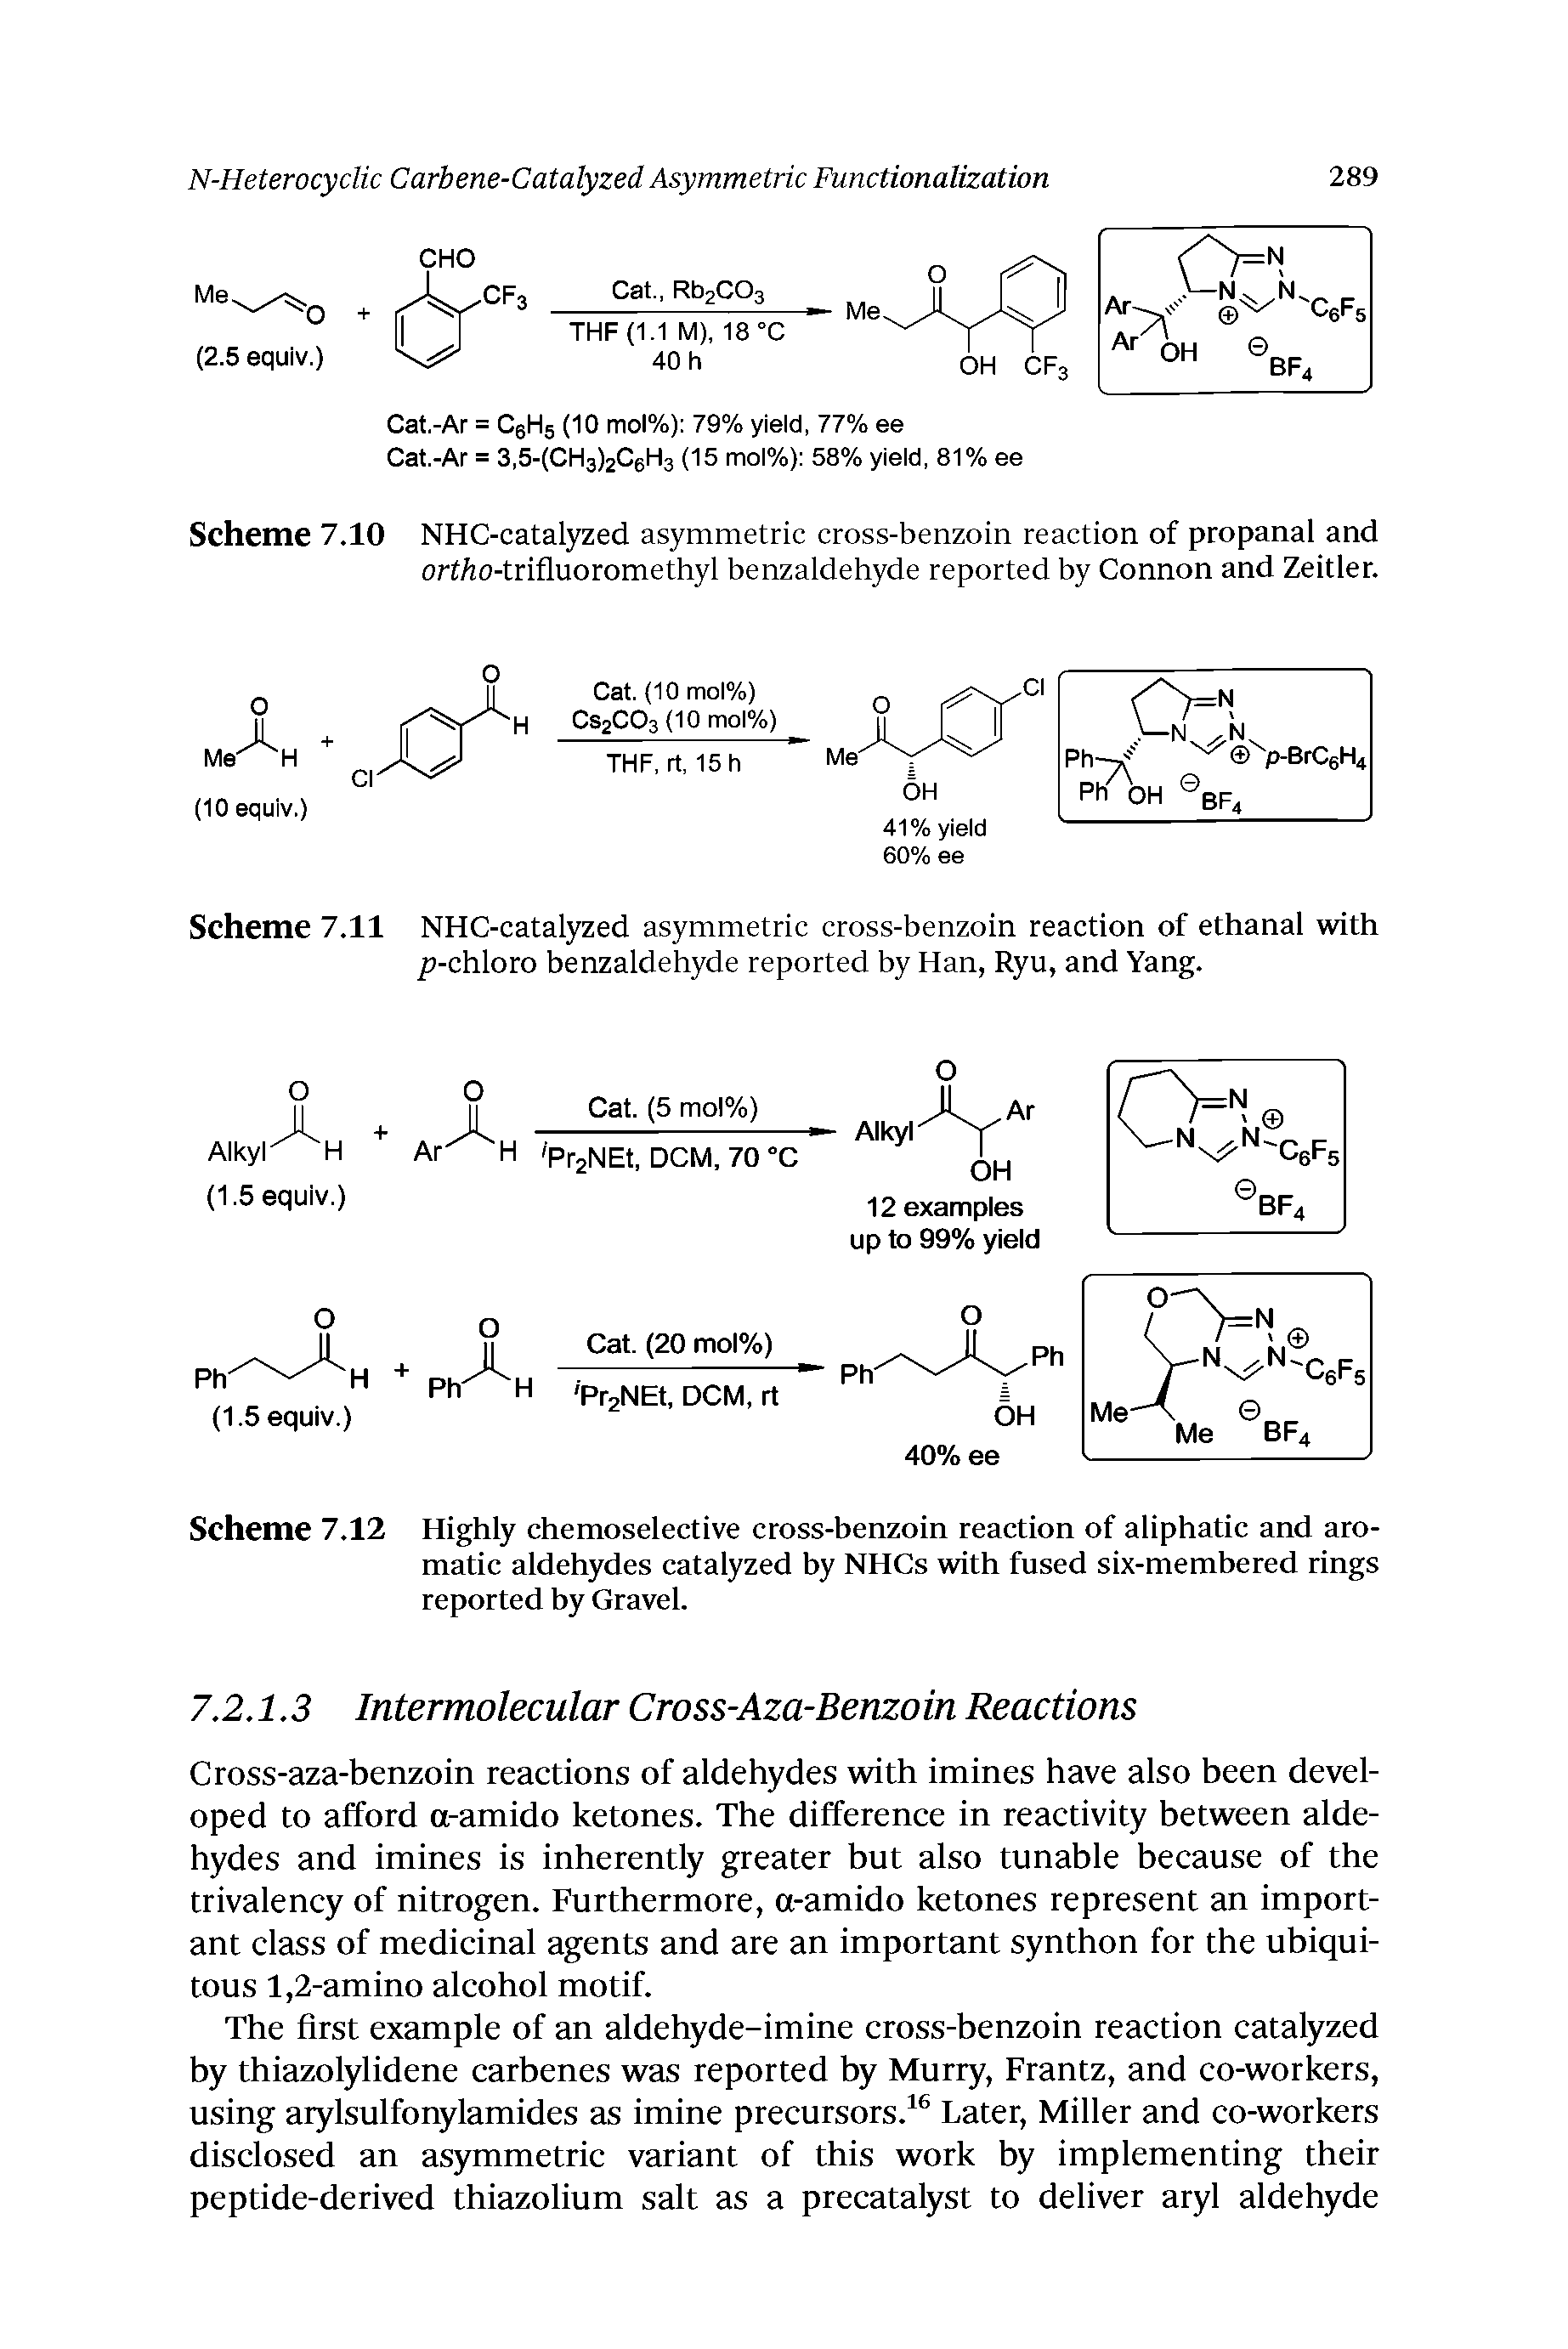 Scheme 7.10 NHC-catal3 ed asymmetric cross-benzoin reaction of propanal and ortAo-trifluoromethyl benzaldehyde reported by Connon and Zeitler.